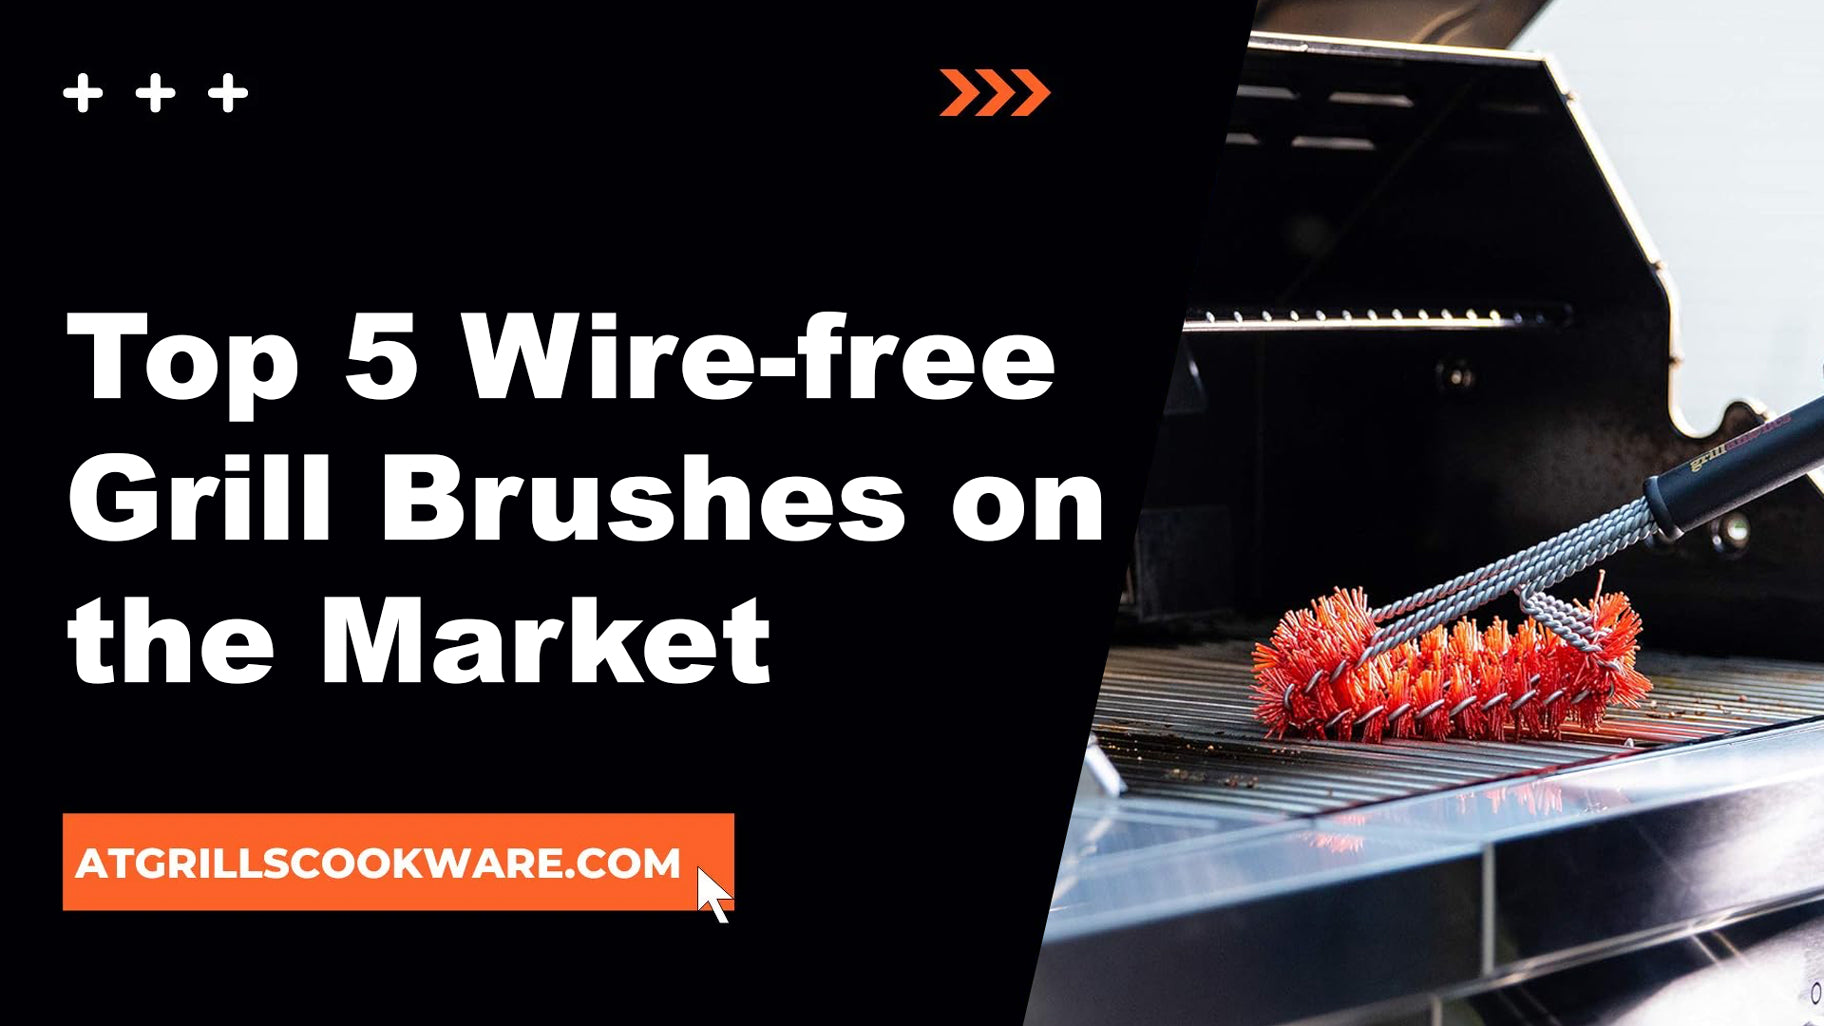 Top 5 Wire-free Grill Brushes on the Market